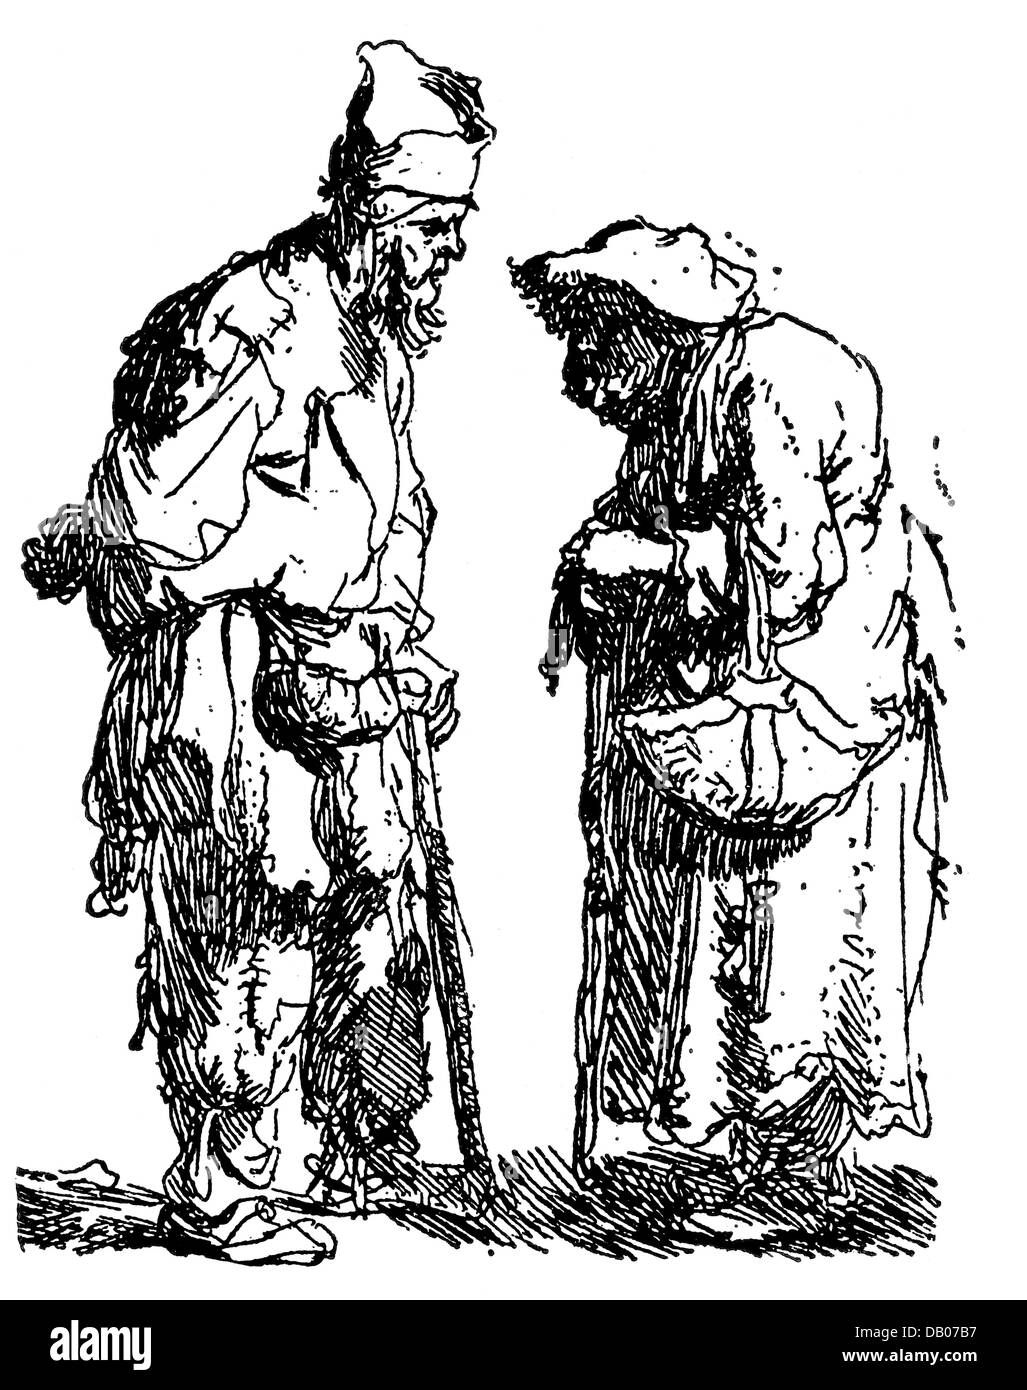 Rembrandt, Harmensz van Rijn, (1606 - 1669), etching, 'Beggar couple', 1630, 7,7 x 6,7 cm, Additional-Rights-Clearences-Not Available Stock Photo